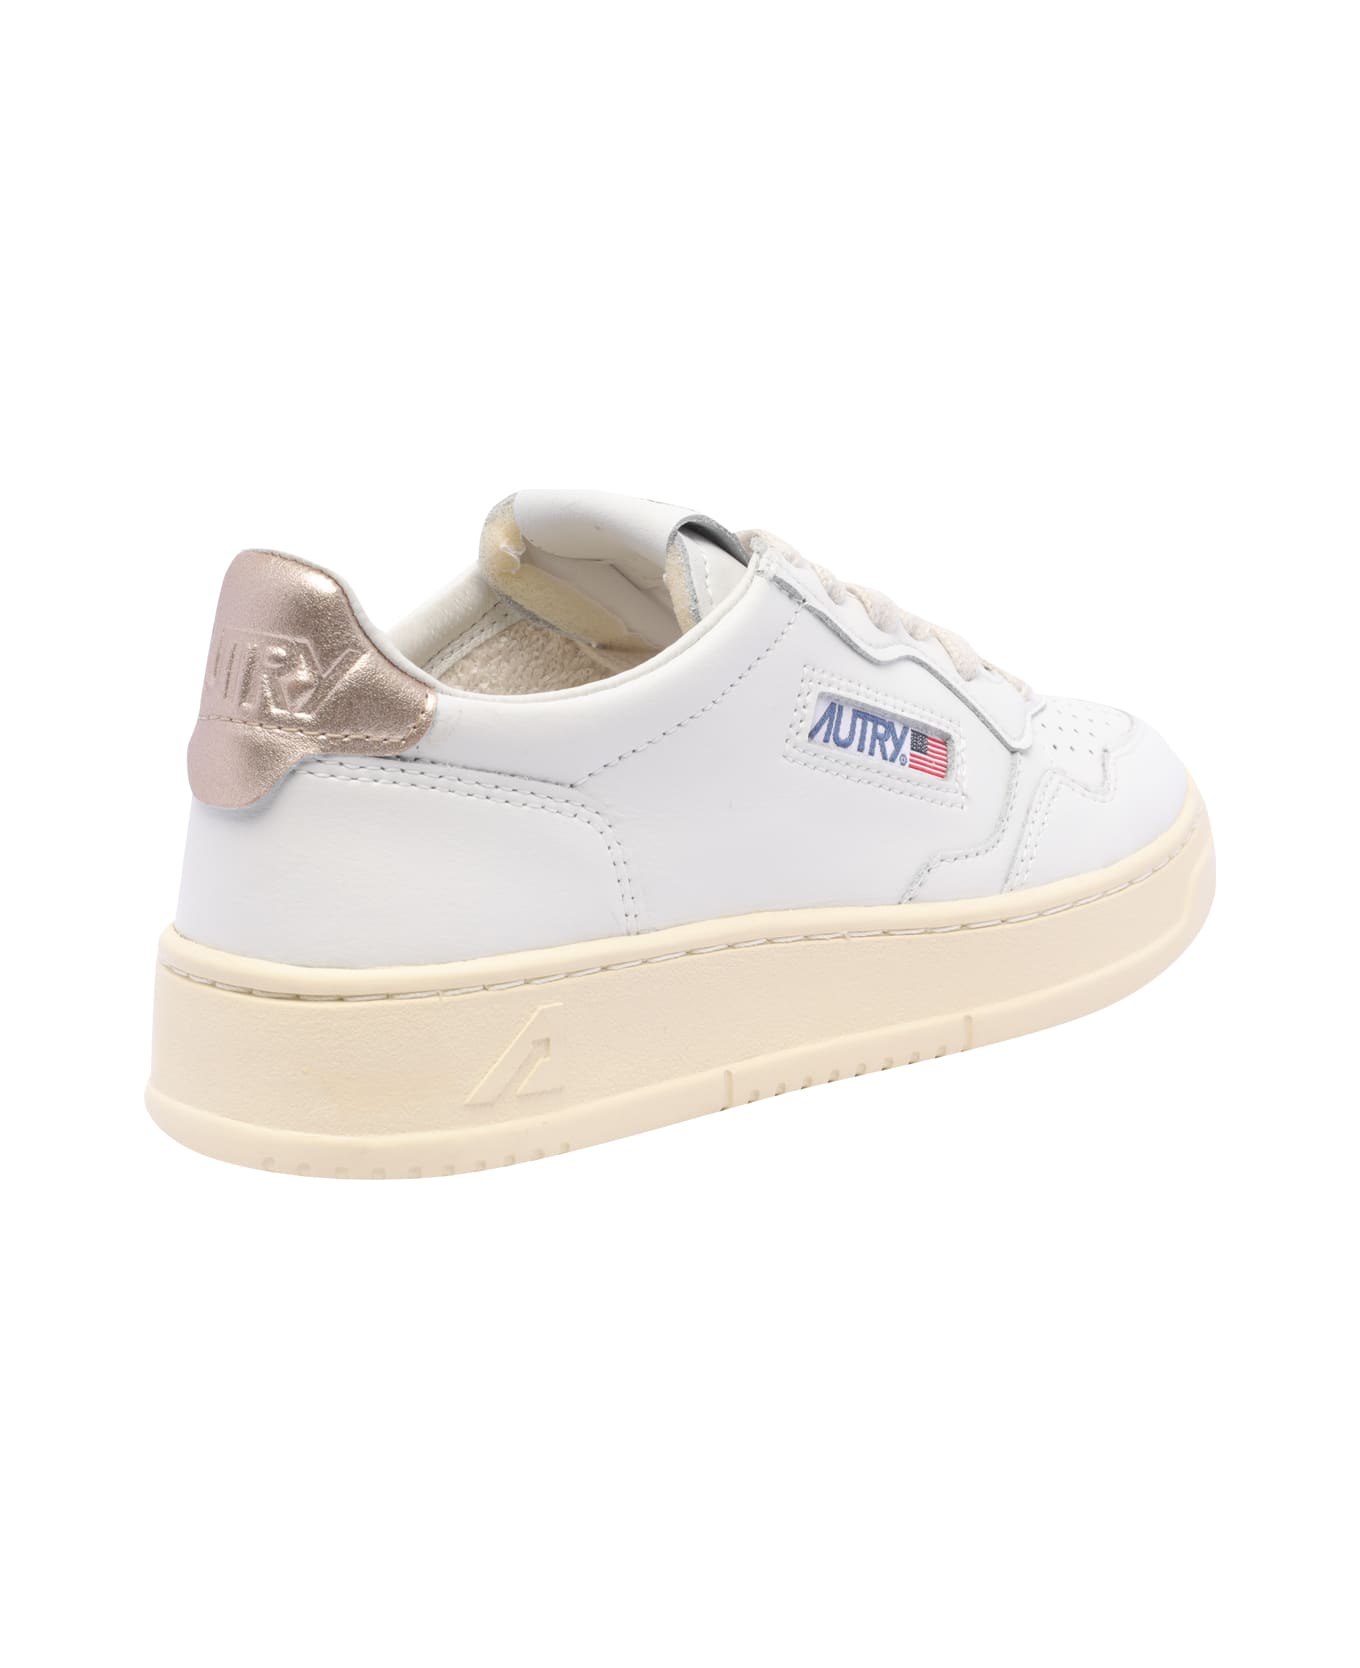 Autry Medalist Low Sneakers - Wht/gold